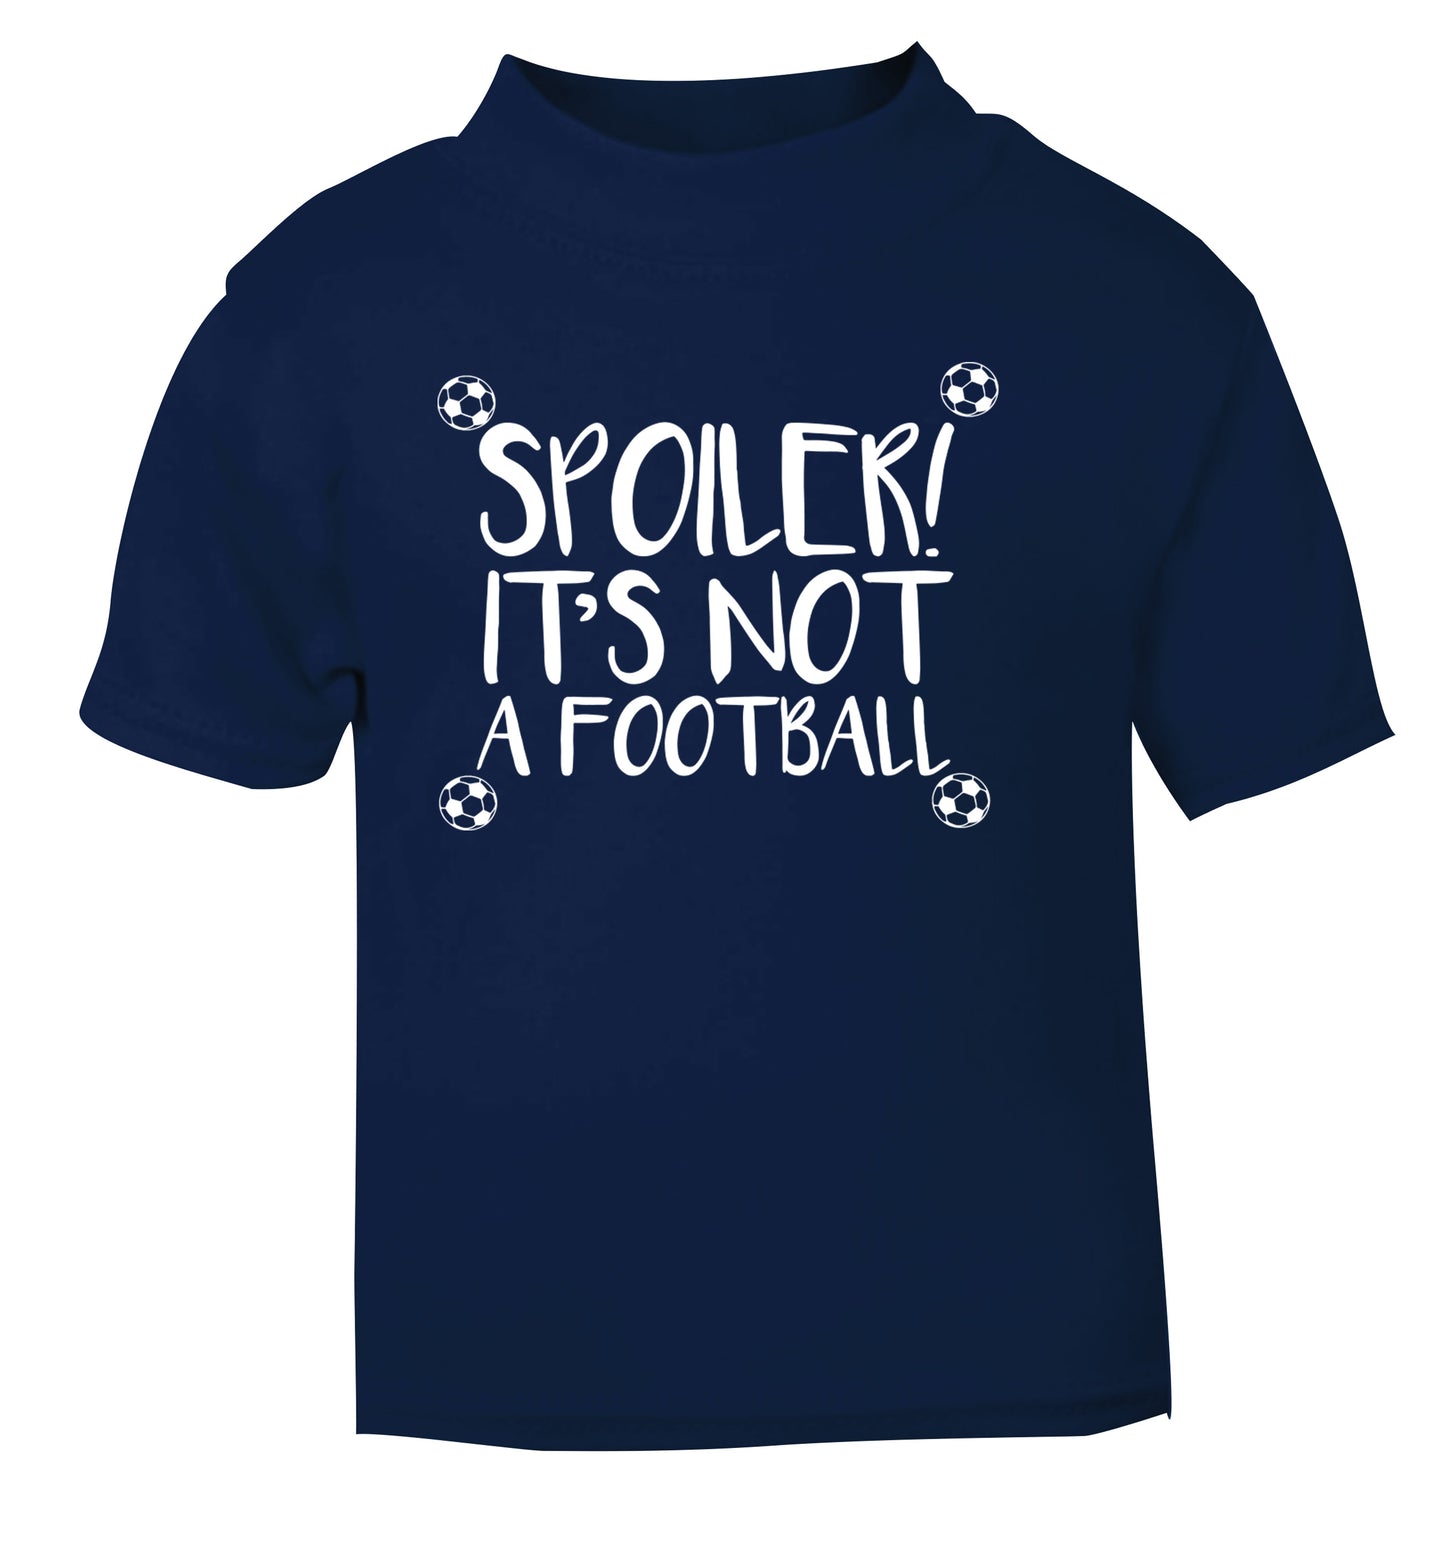 Spoiler it's not a football navy Baby Toddler Tshirt 2 Years